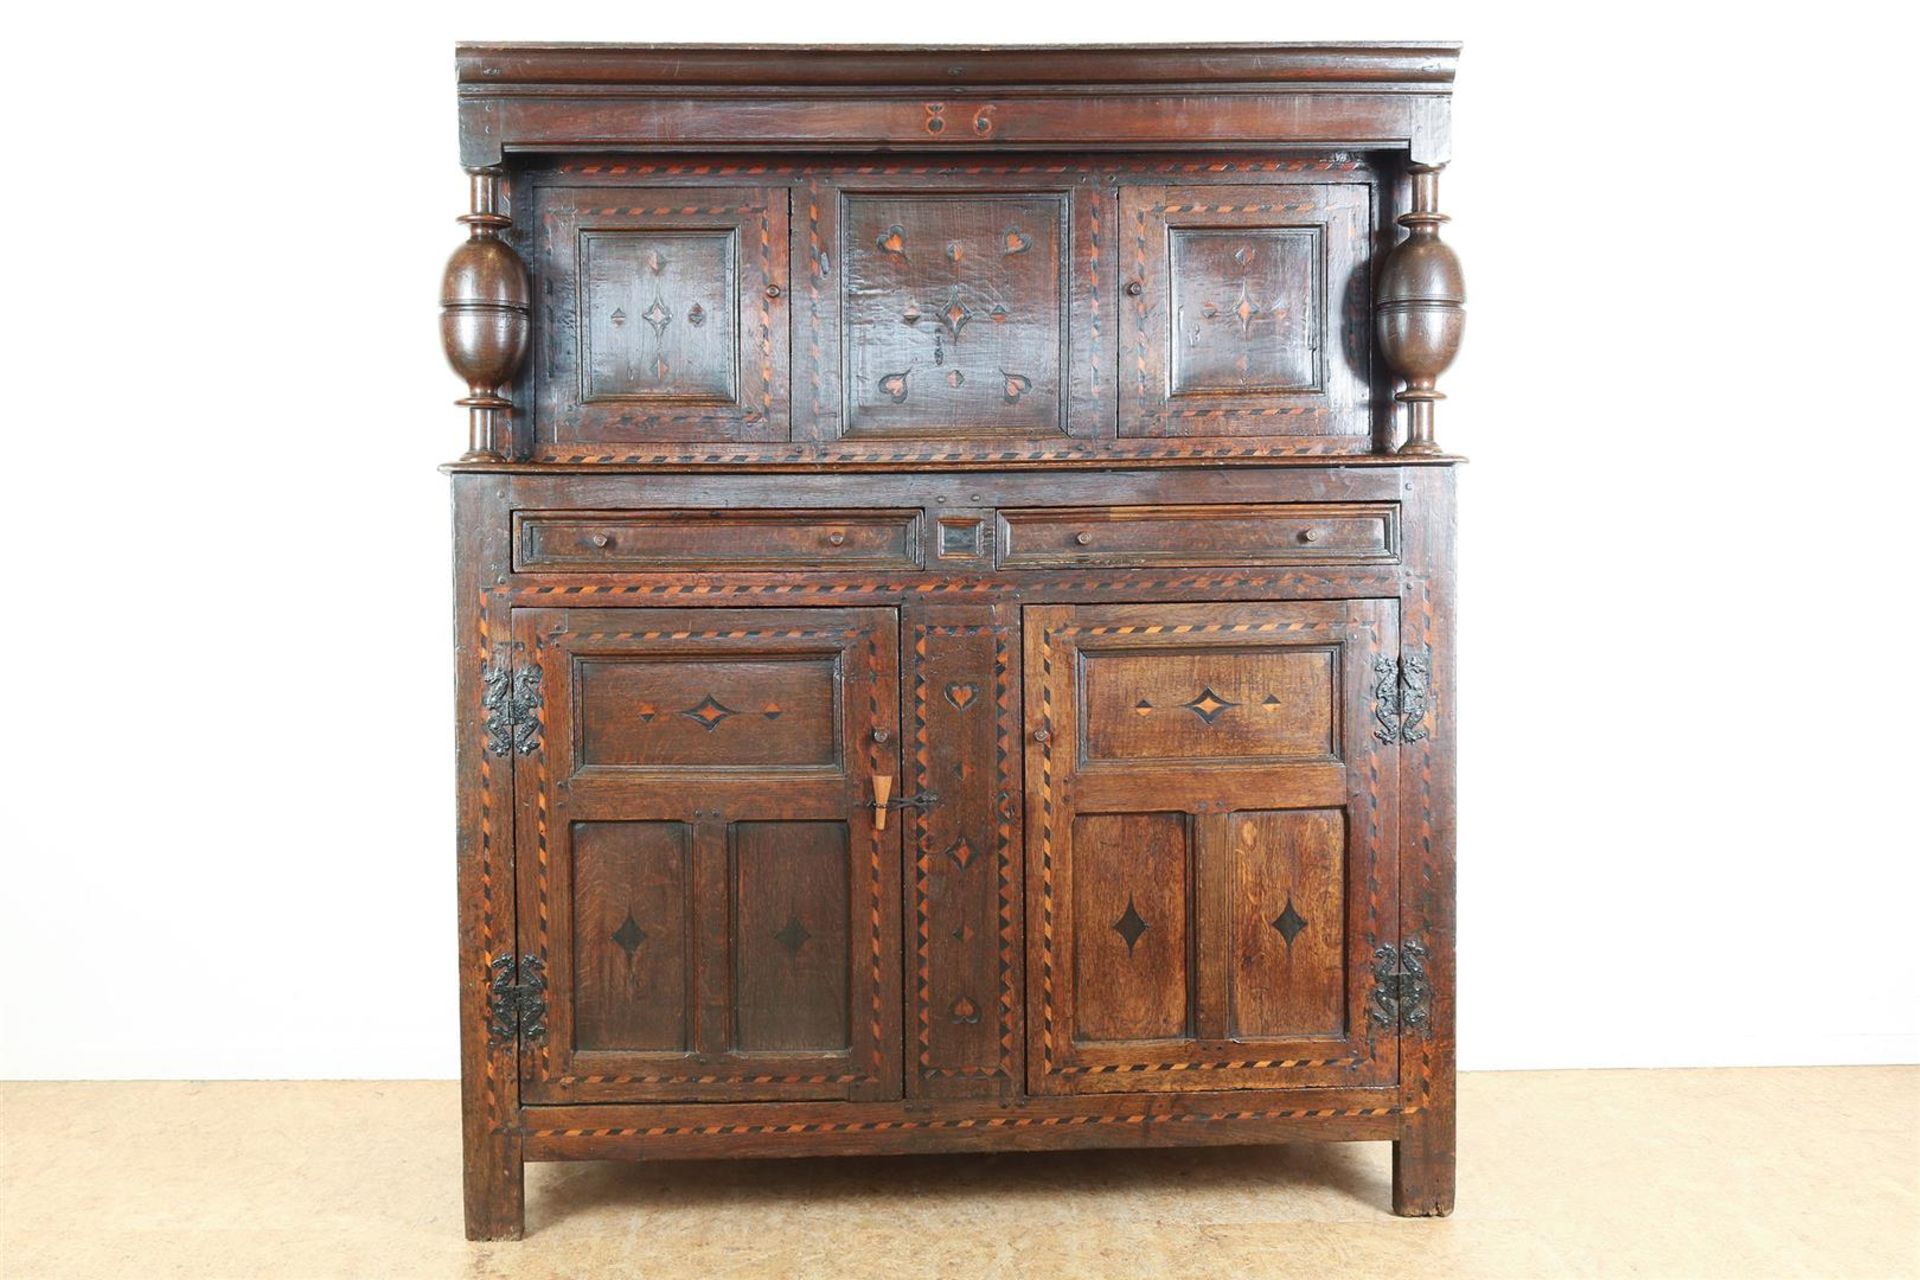 Oak sideboard, upper cabinet with straight hood and 2 panel doors inlaid with fruit wood supported